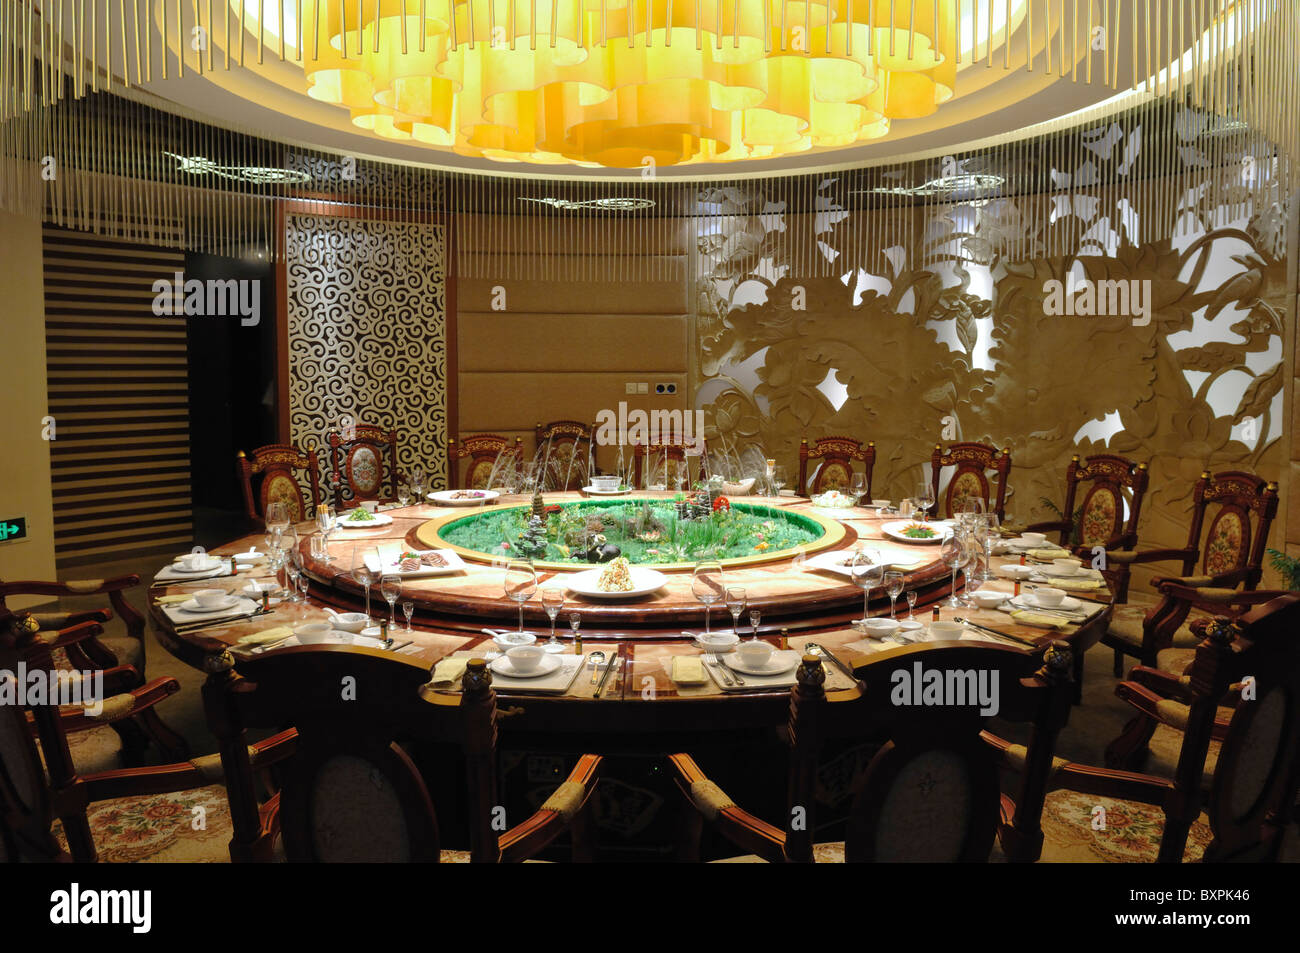 A round table laid for a traditional Chinese banquet Stock Photo